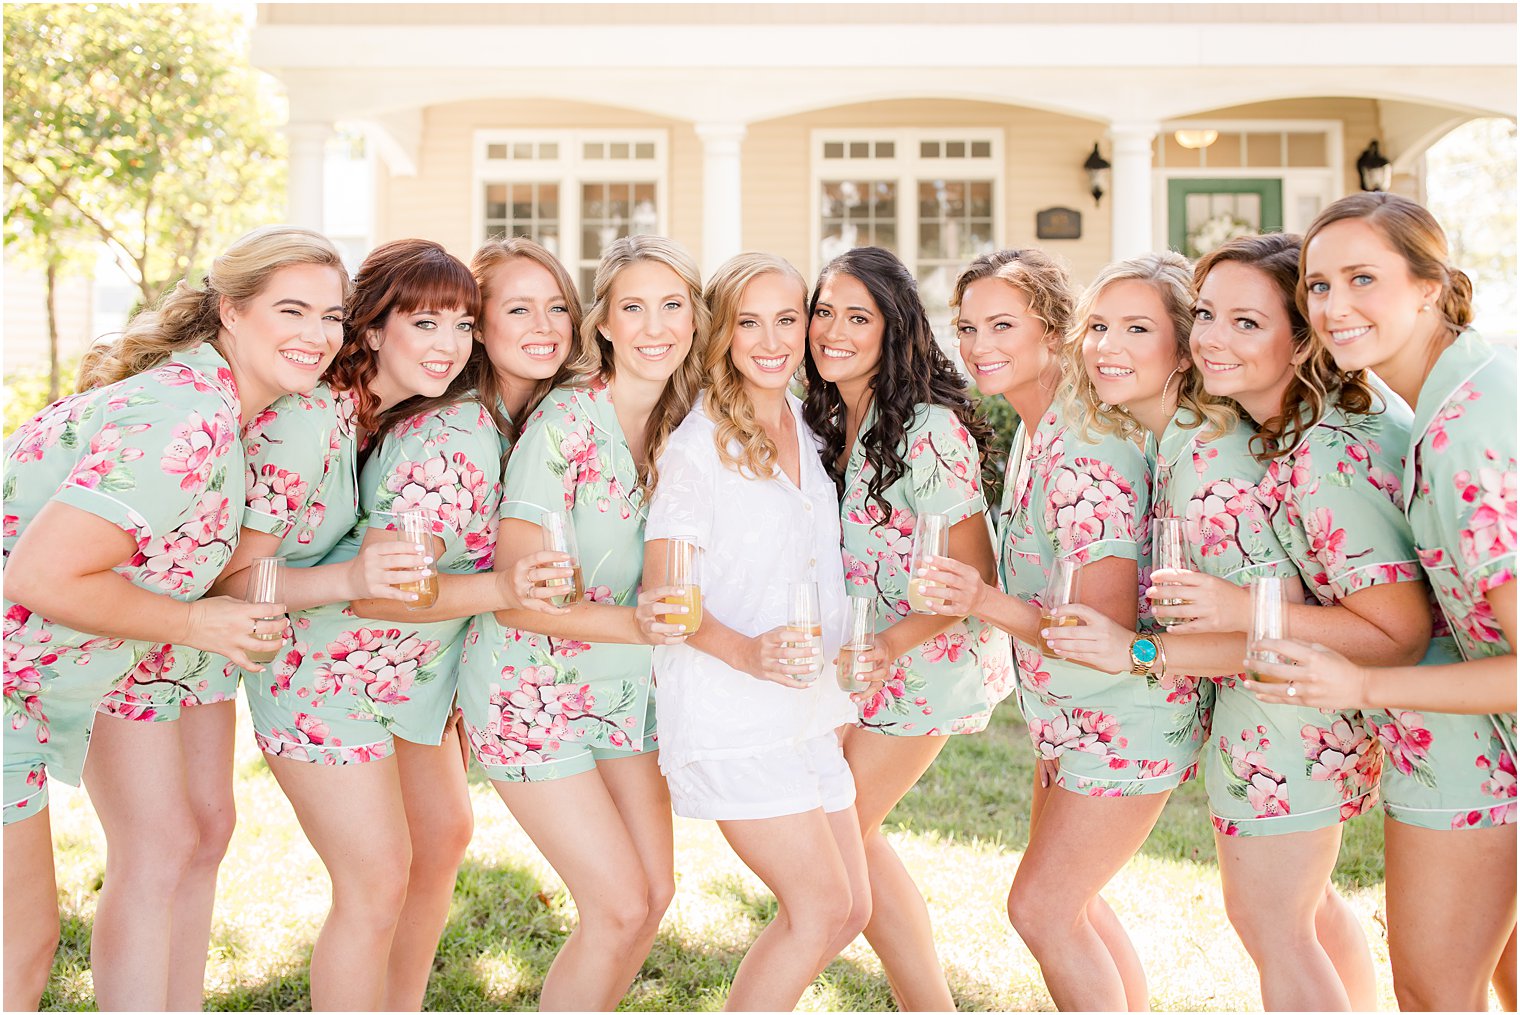 Champagne Toast With Your Bridesmaids Getting Ready Photos 2016